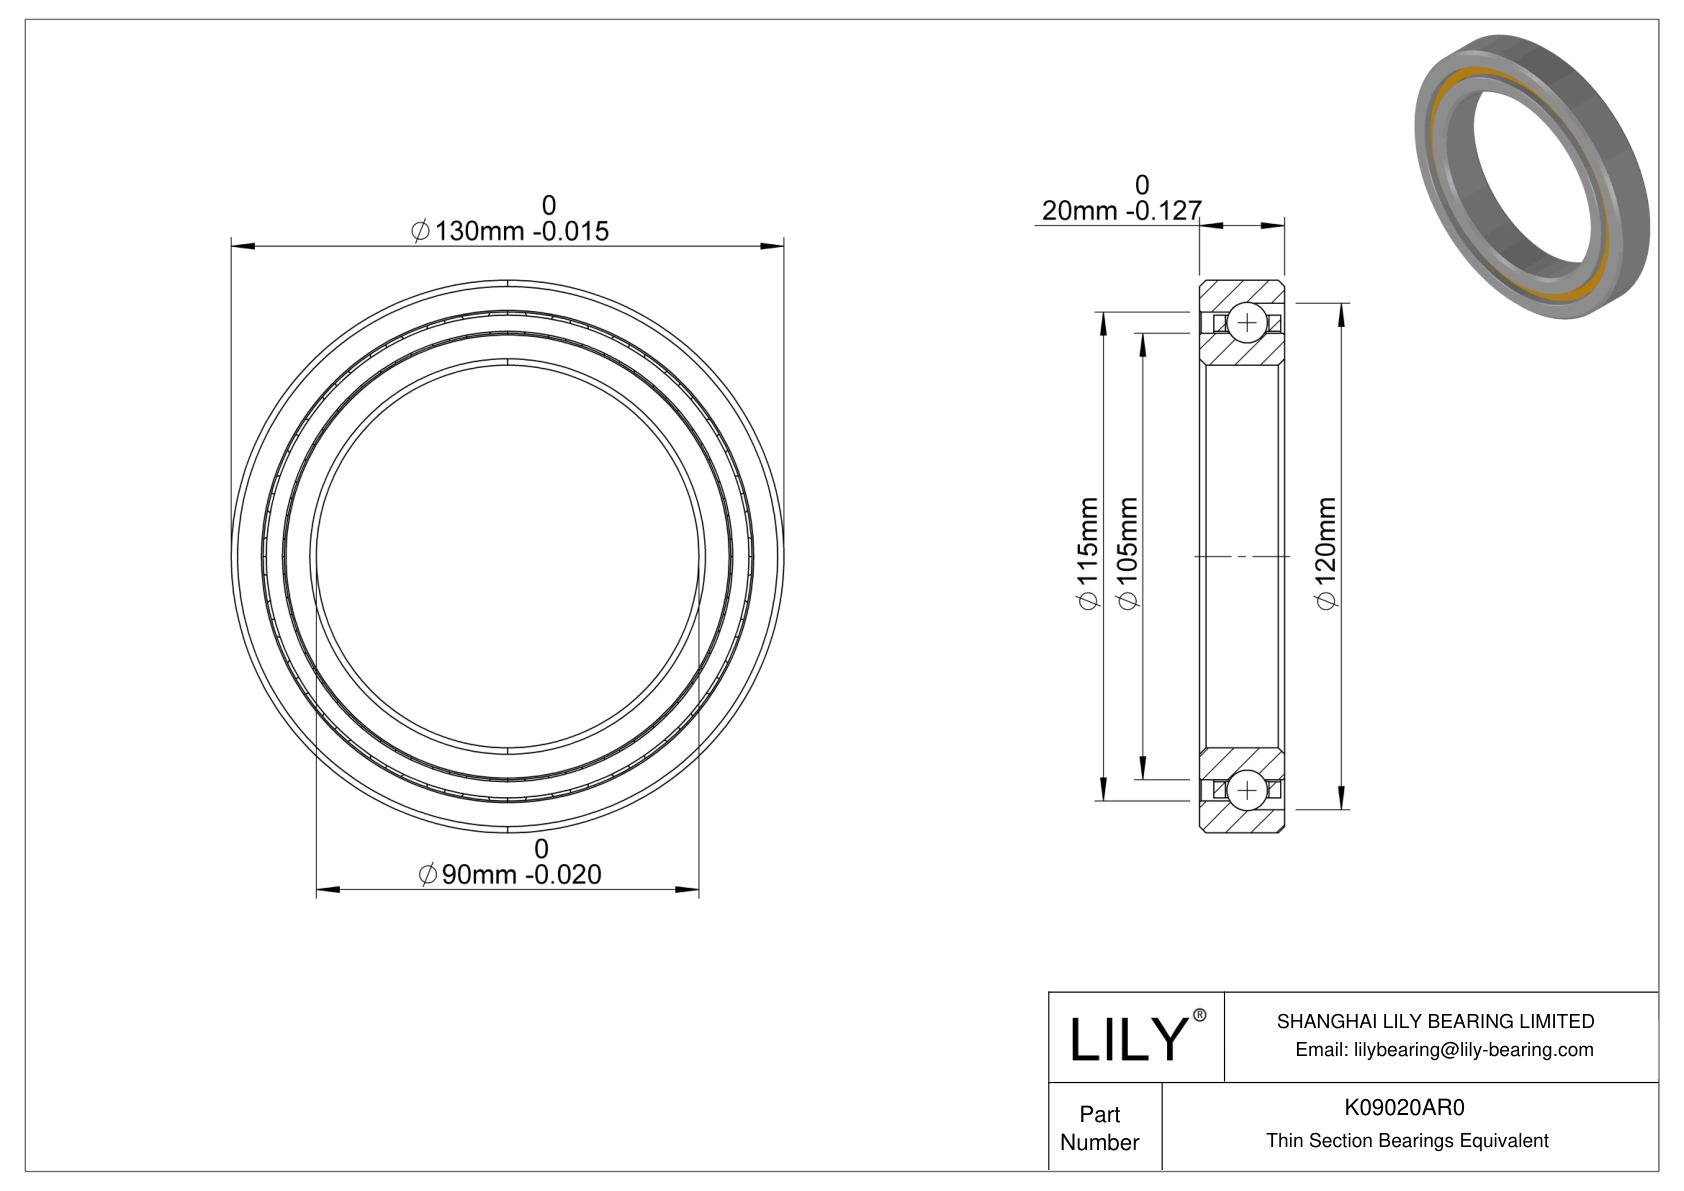 K09020AR0 Constant Section (CS) Bearings cad drawing